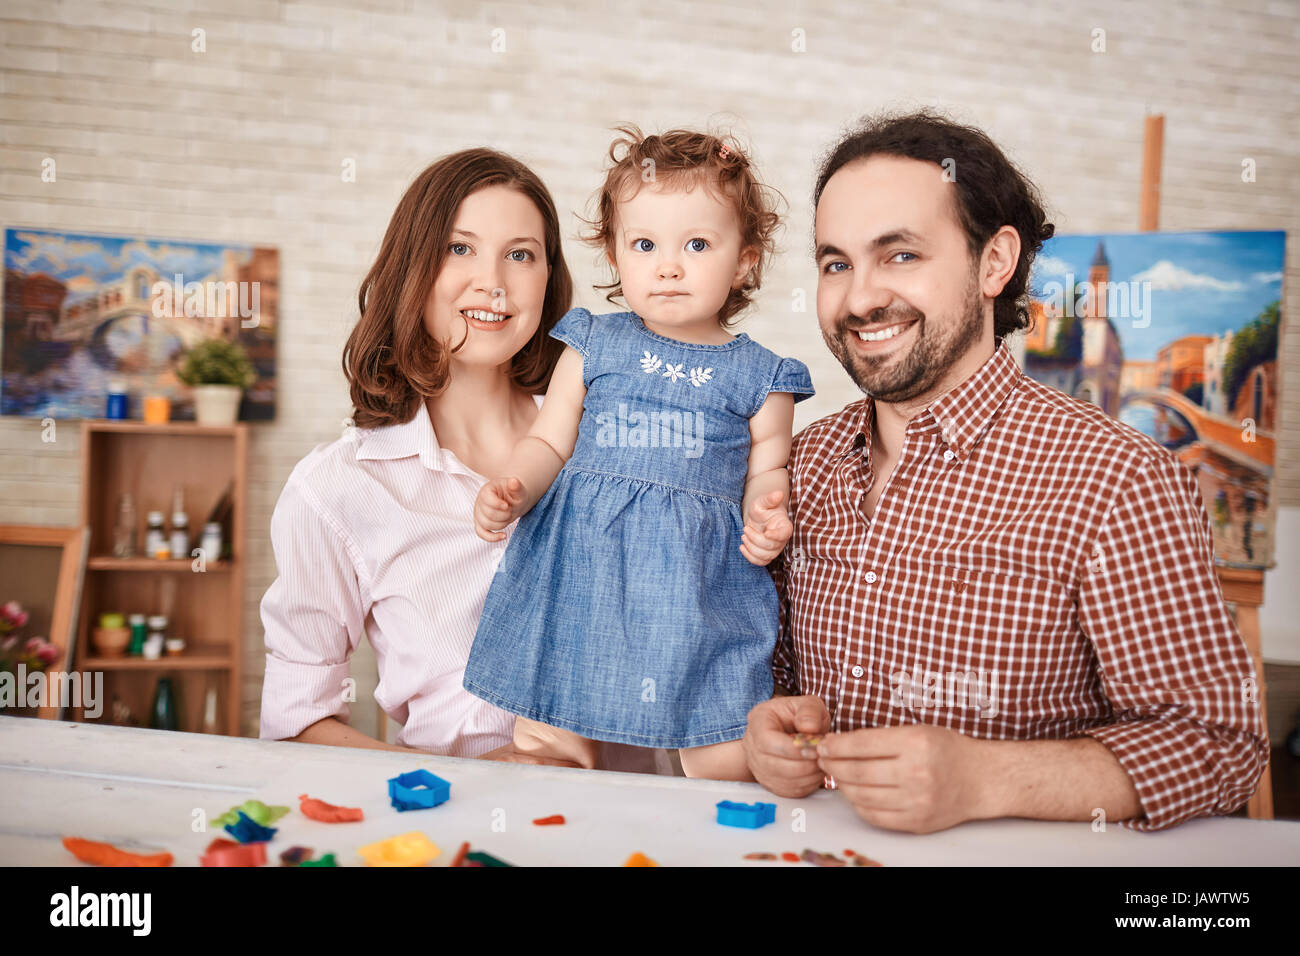 Happy Family Posing for Portrait at Home Stock Photo